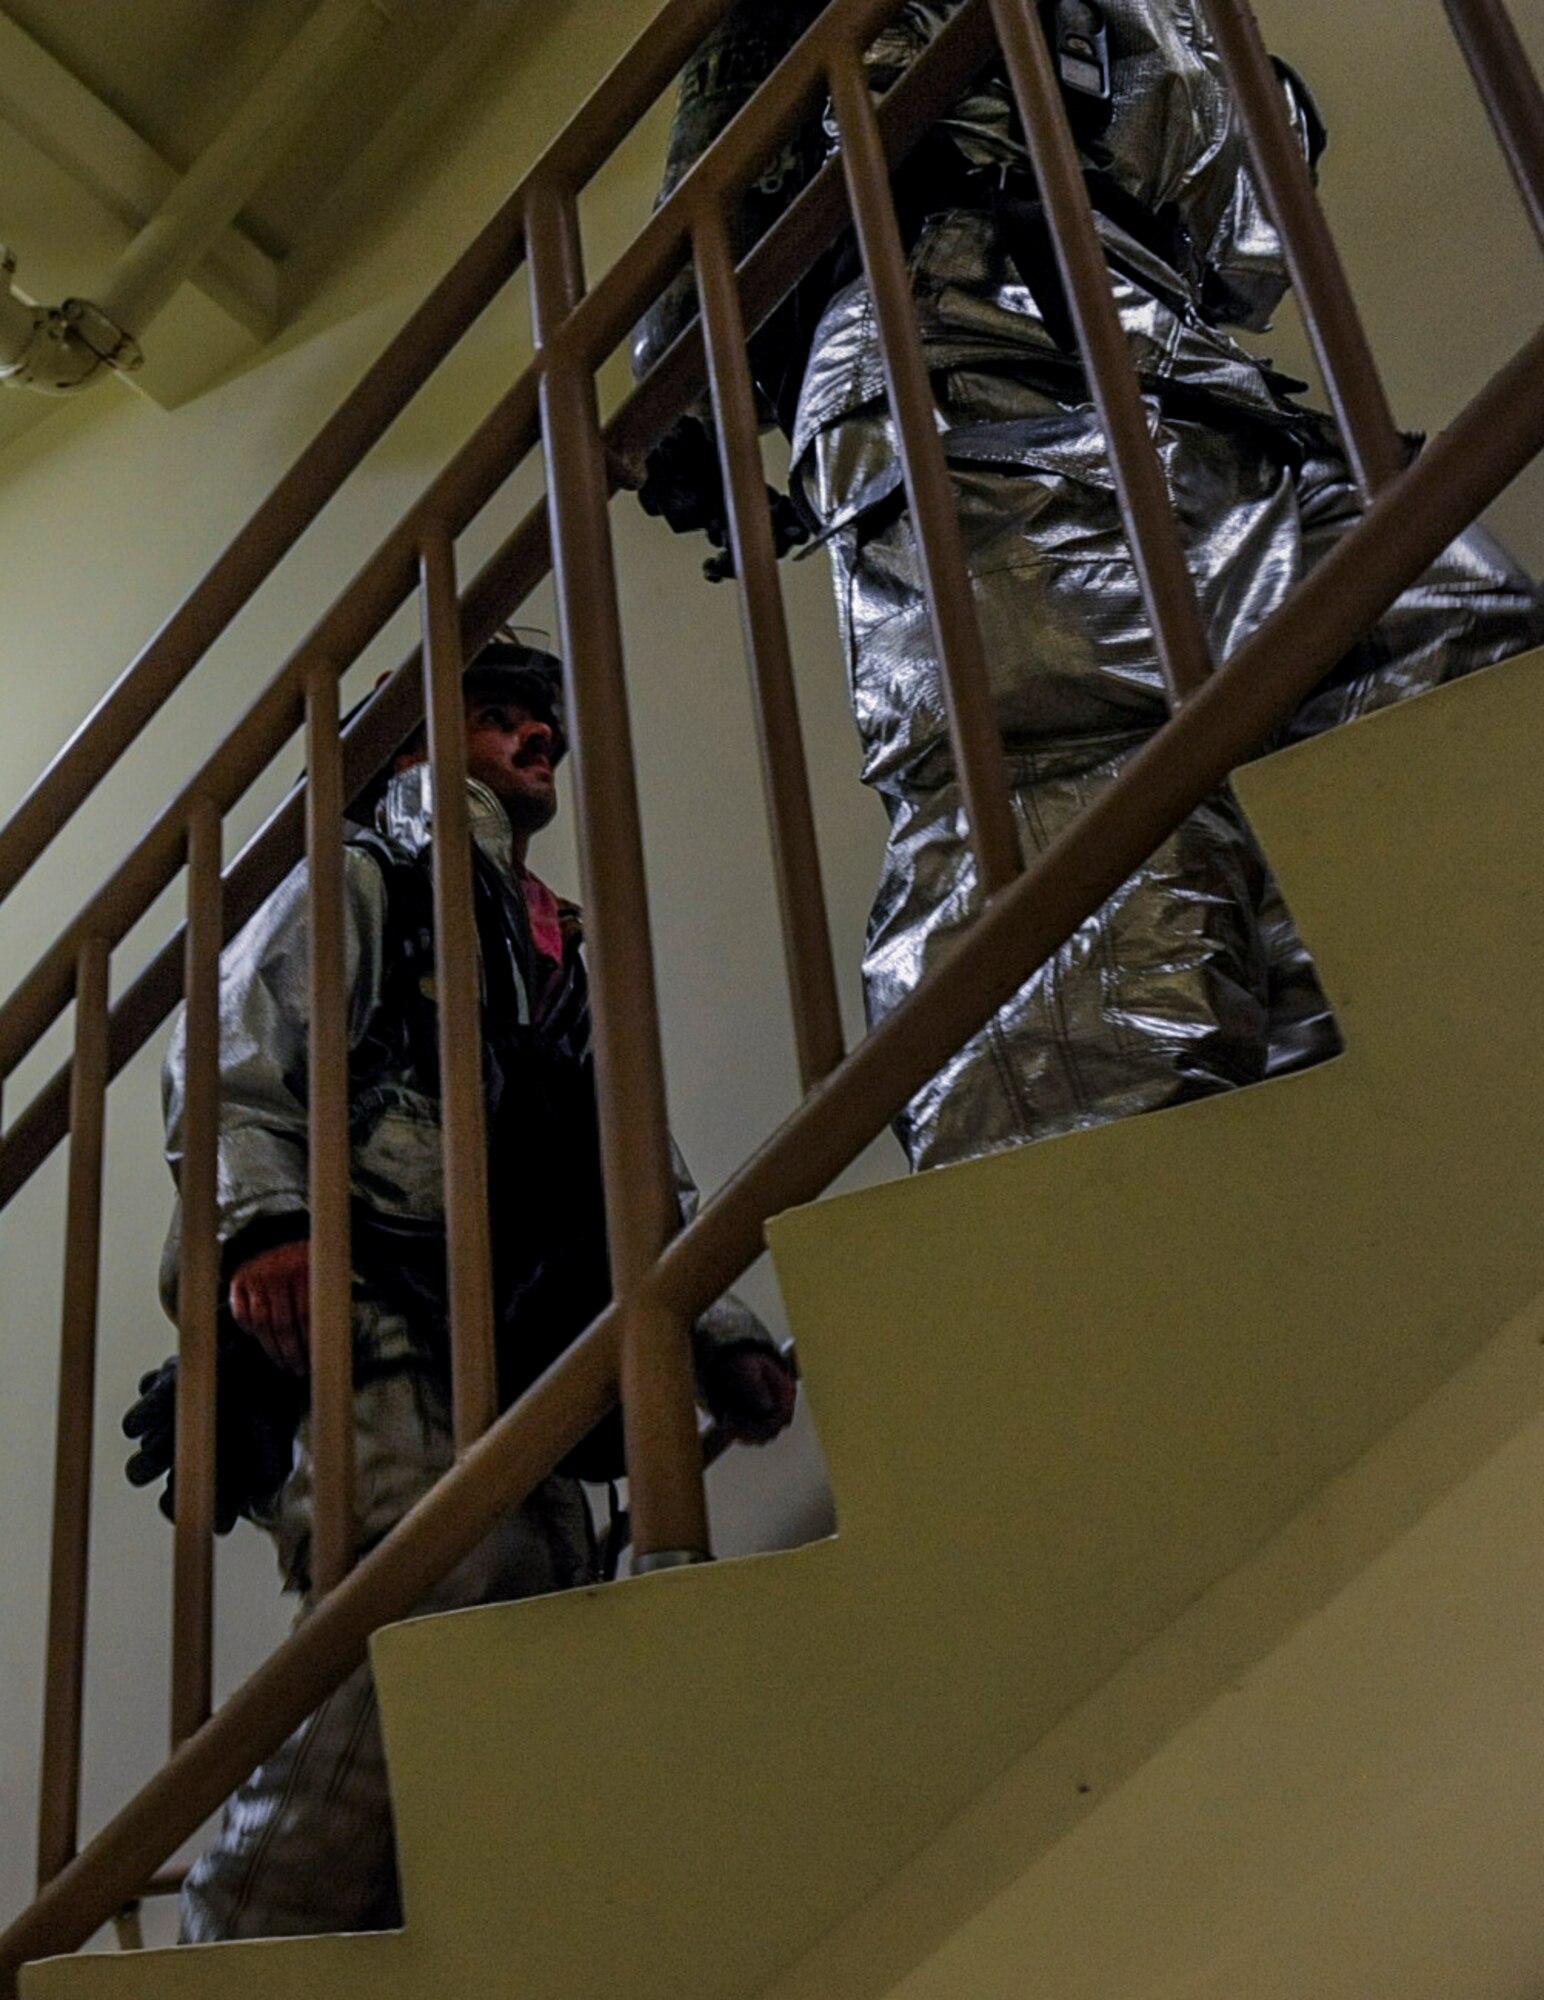 U.S. Air Force firefighters from the 8th Civil Engineer Squadron climb up flights of stairs at Kunsan Air Base, Republic of Korea, Sept. 12, 2016. The 9/11 memorial stair climb event is a tribute to the 343 firefighters who gave their lives during the tragic events at the World Trade Center on September 11, 2001. (U.S. Air Force photo by Senior Airman Colville McFee/Released)